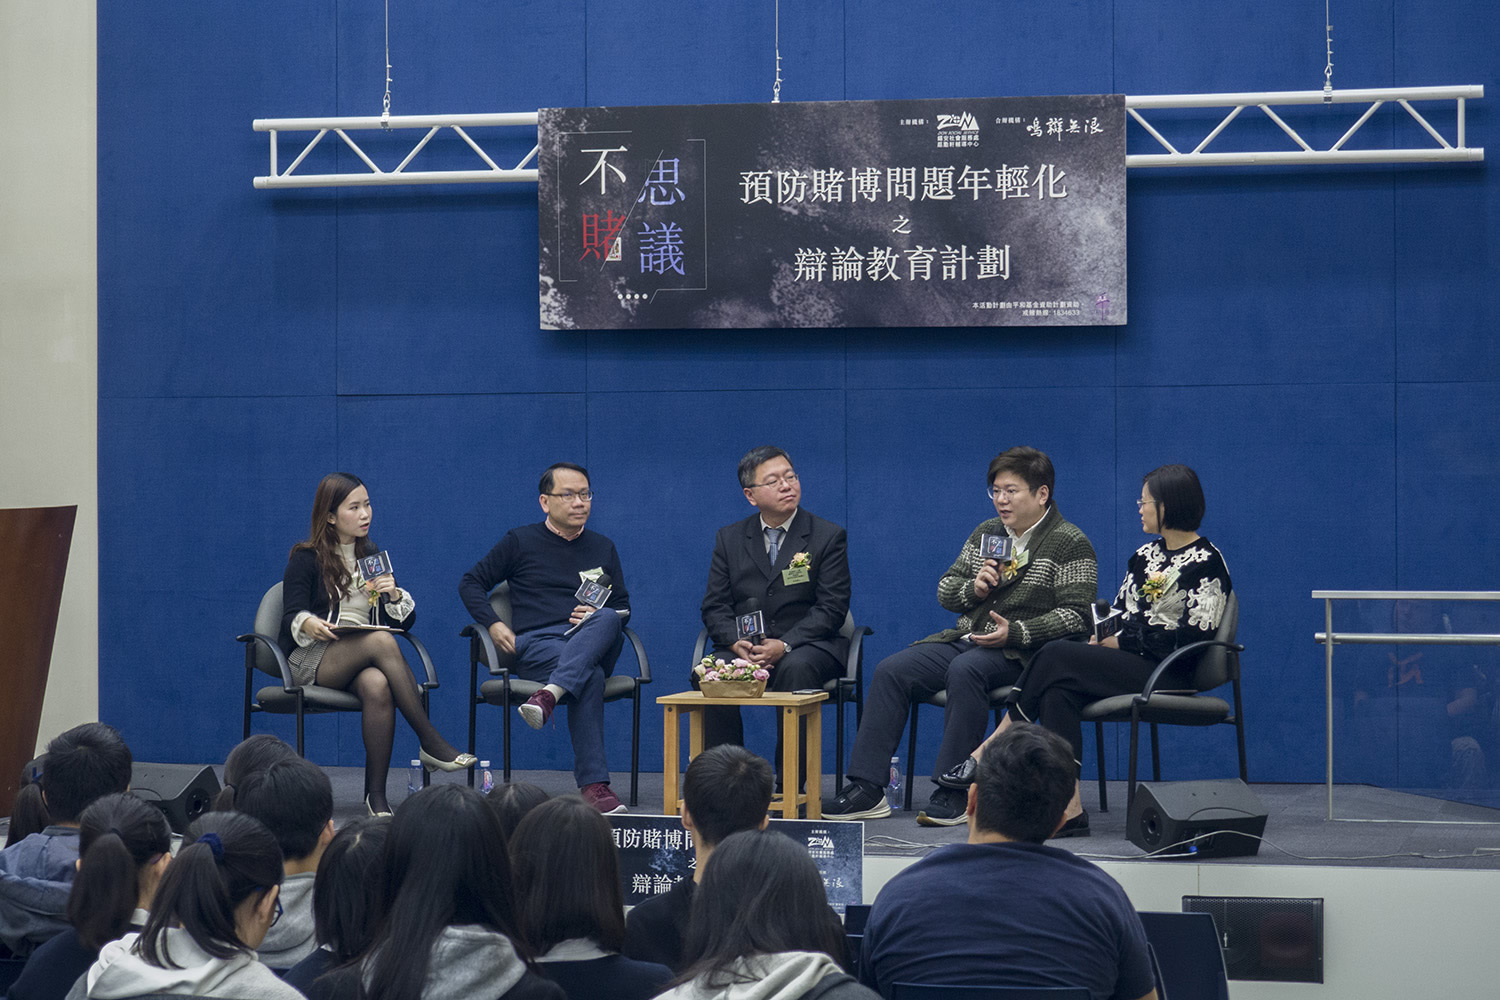 The seminar on no gambling was held on 11 March featuring topics such as “The role of family members of gamblers with gambling disorder” and “The objectives of counselling with gamblers”. 